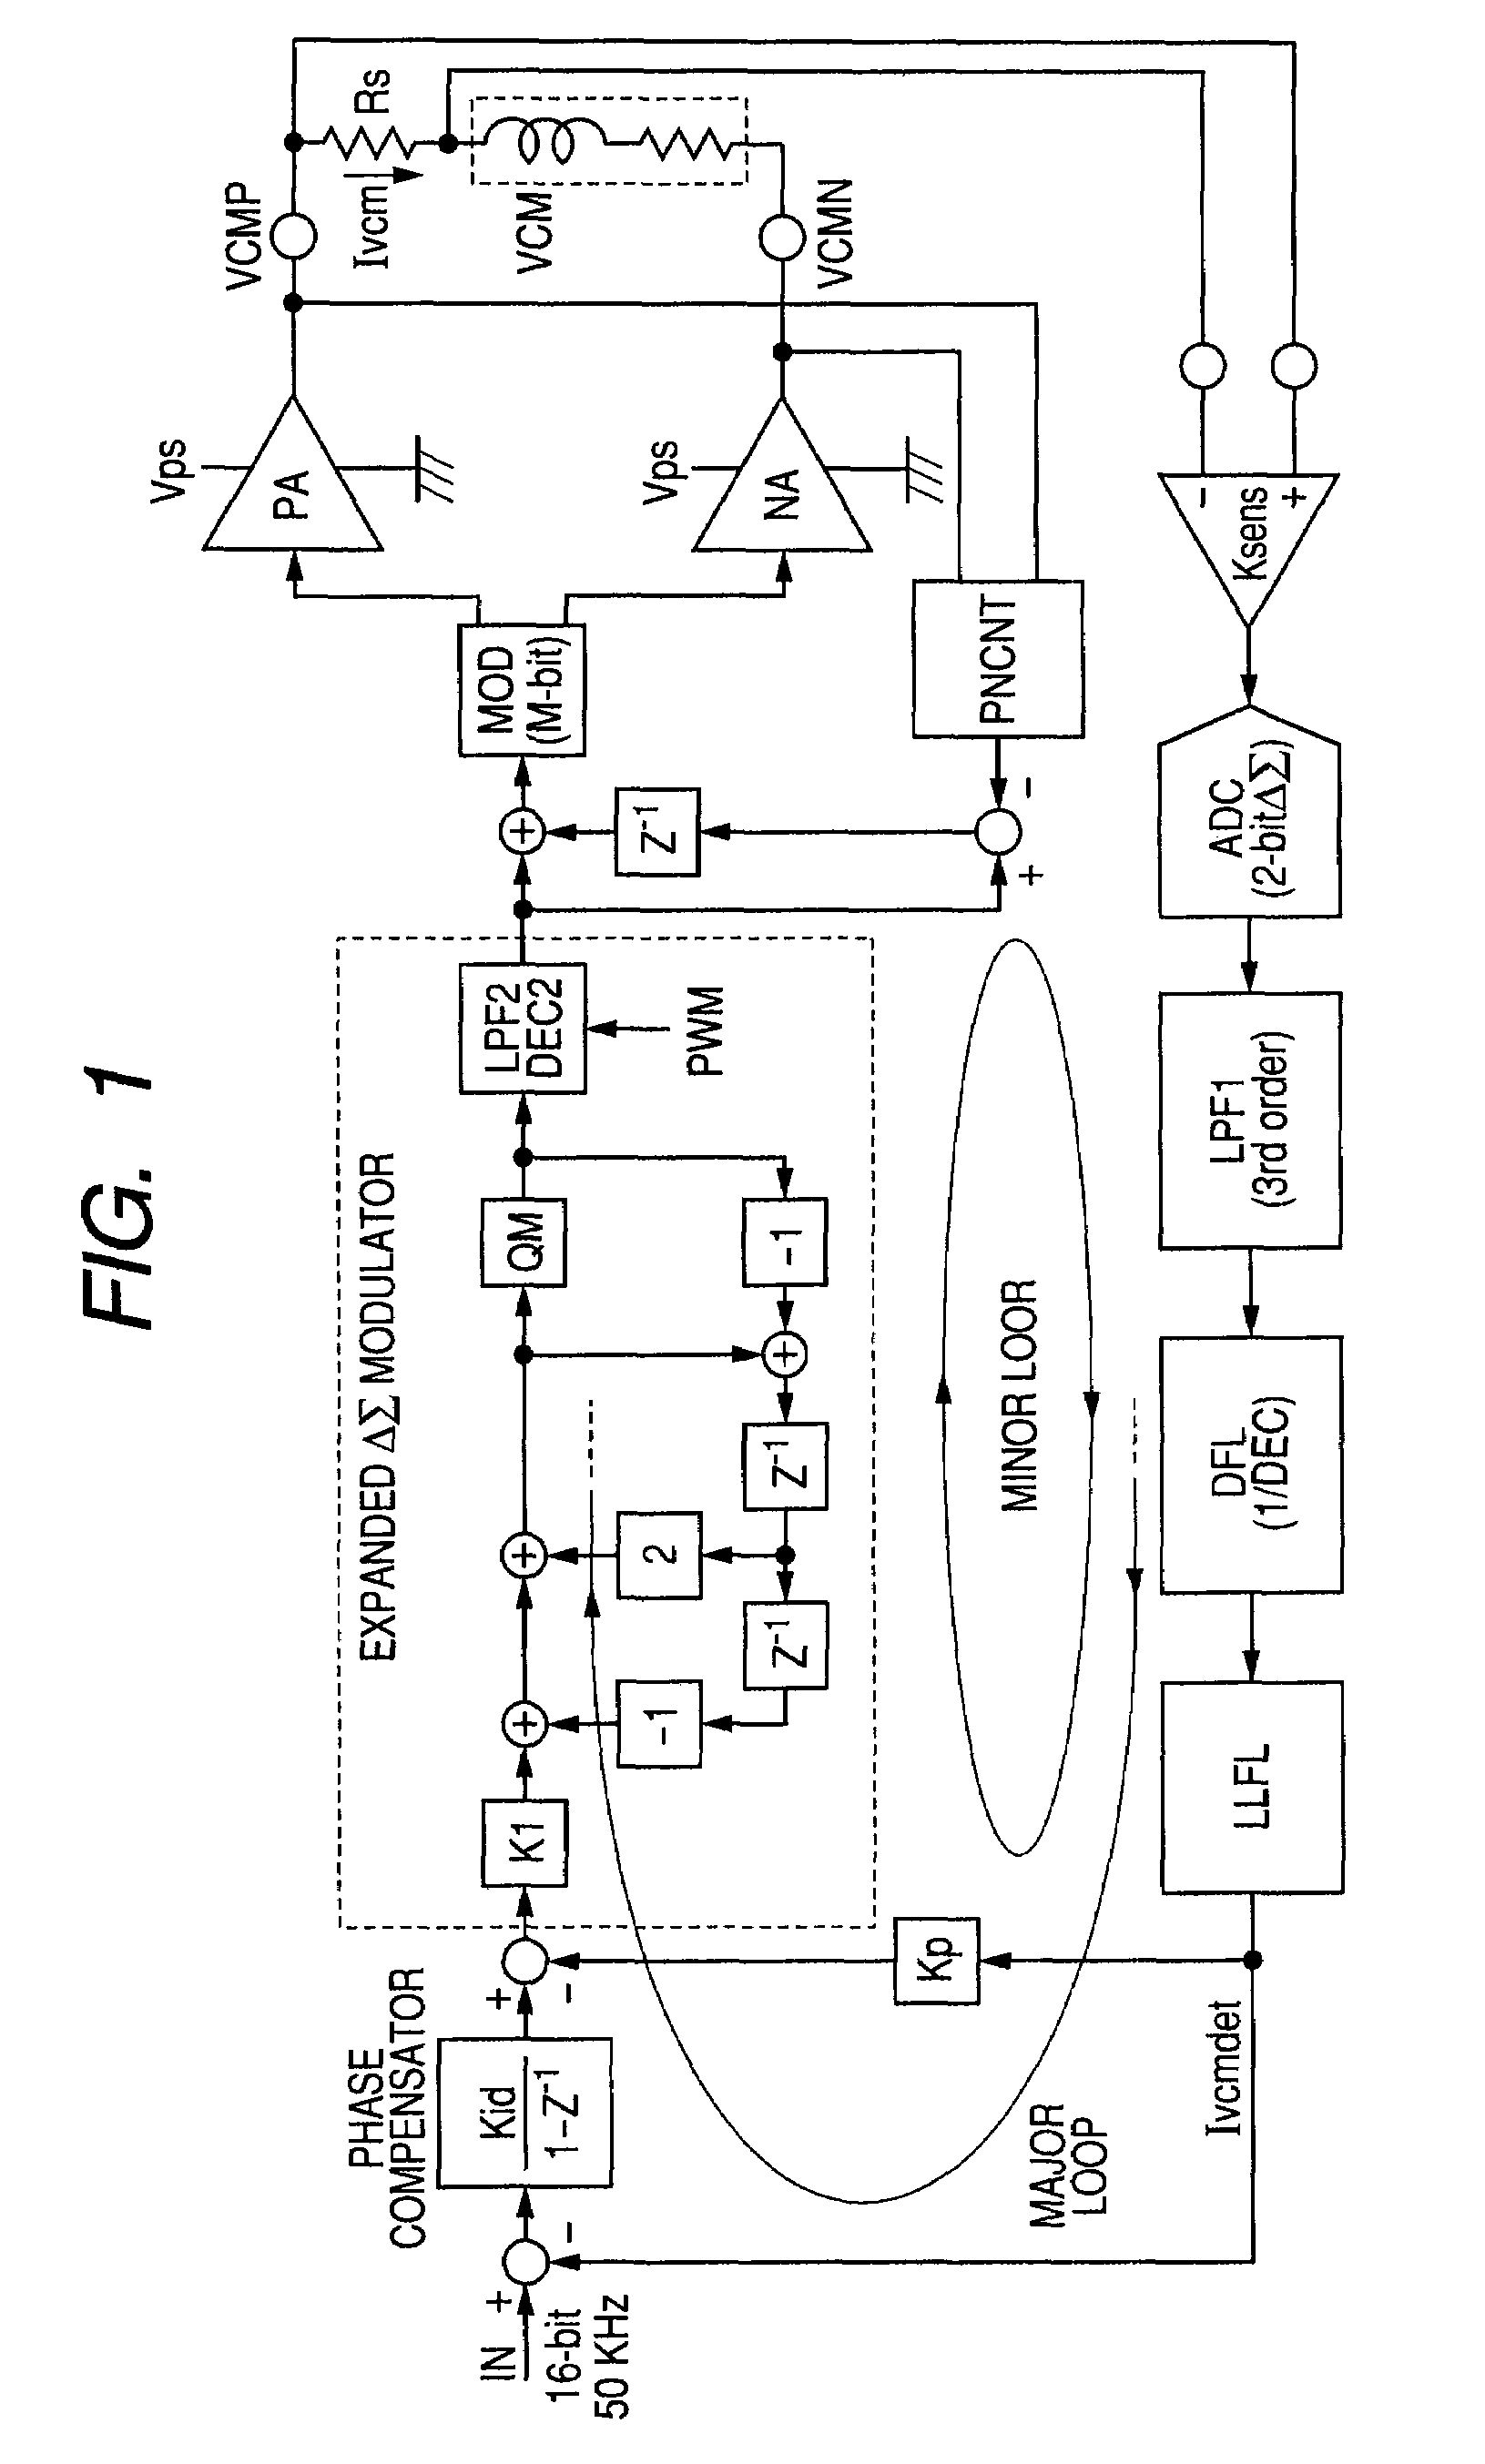 VCM driver and PWM amplifier